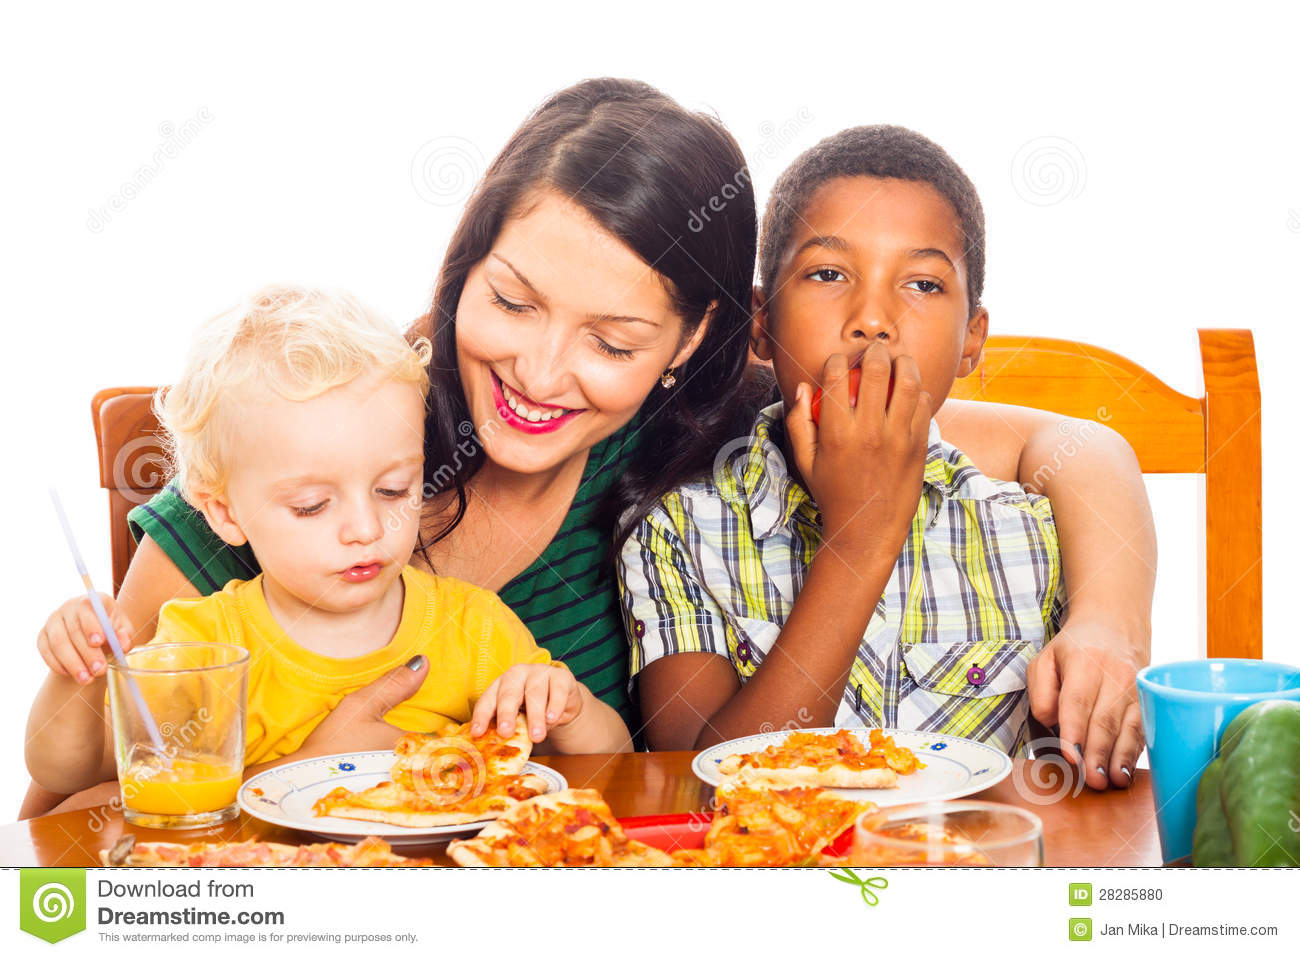 Women With Children Eating Pizza Isolated On White Background